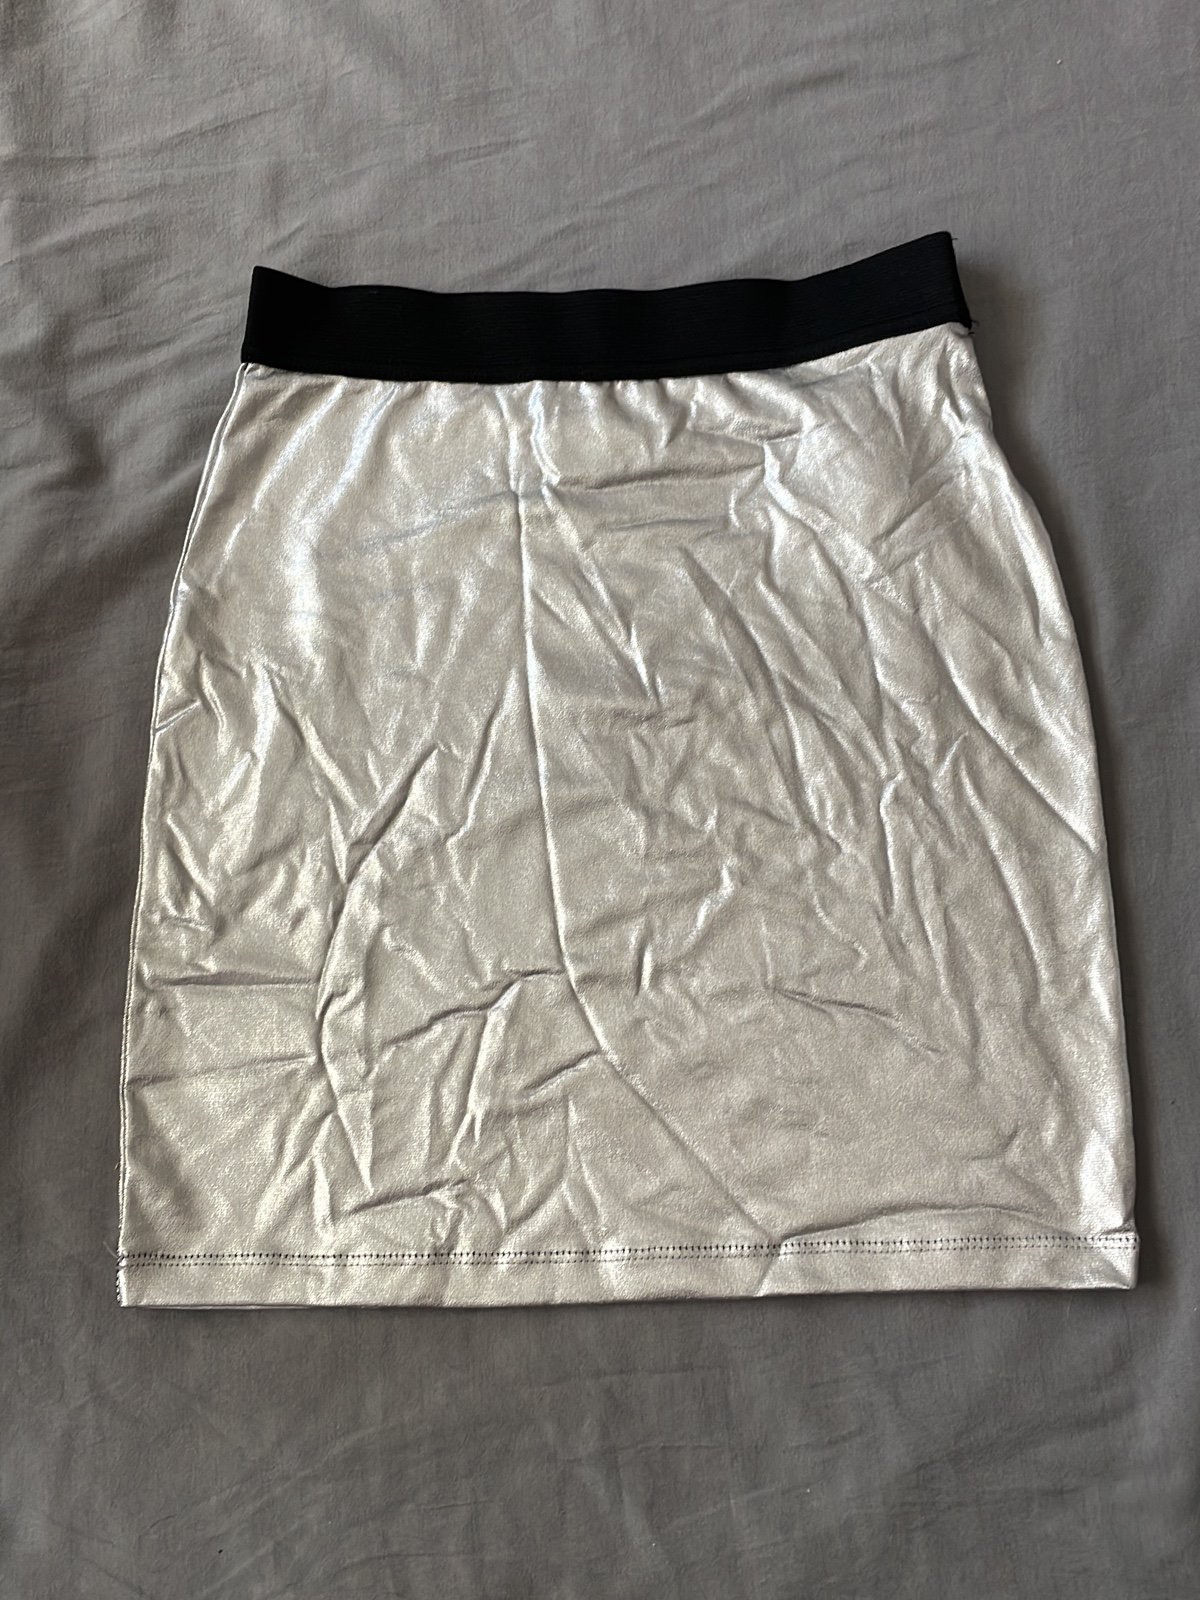 The Best Seller NEW FOREVER 21 SILVER MINI SKIRT SMALL ix1ODy8aF best sale